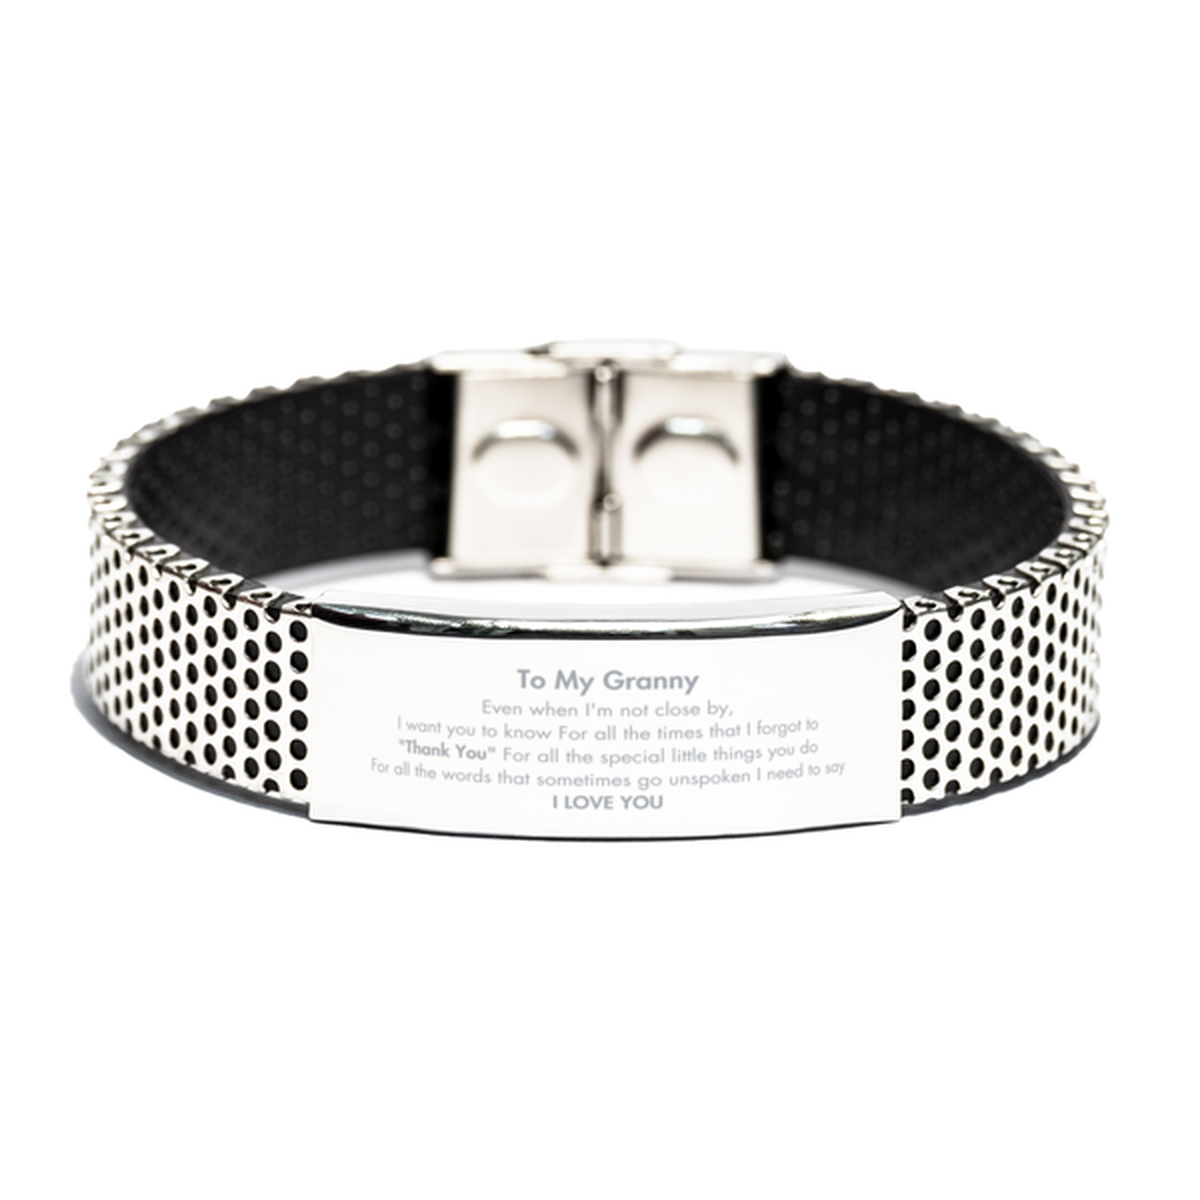 Thank You Gifts for Granny, Keepsake Stainless Steel Bracelet Gifts for Granny Birthday Mother's day Father's Day Granny For all the words That sometimes go unspoken I need to say I LOVE YOU